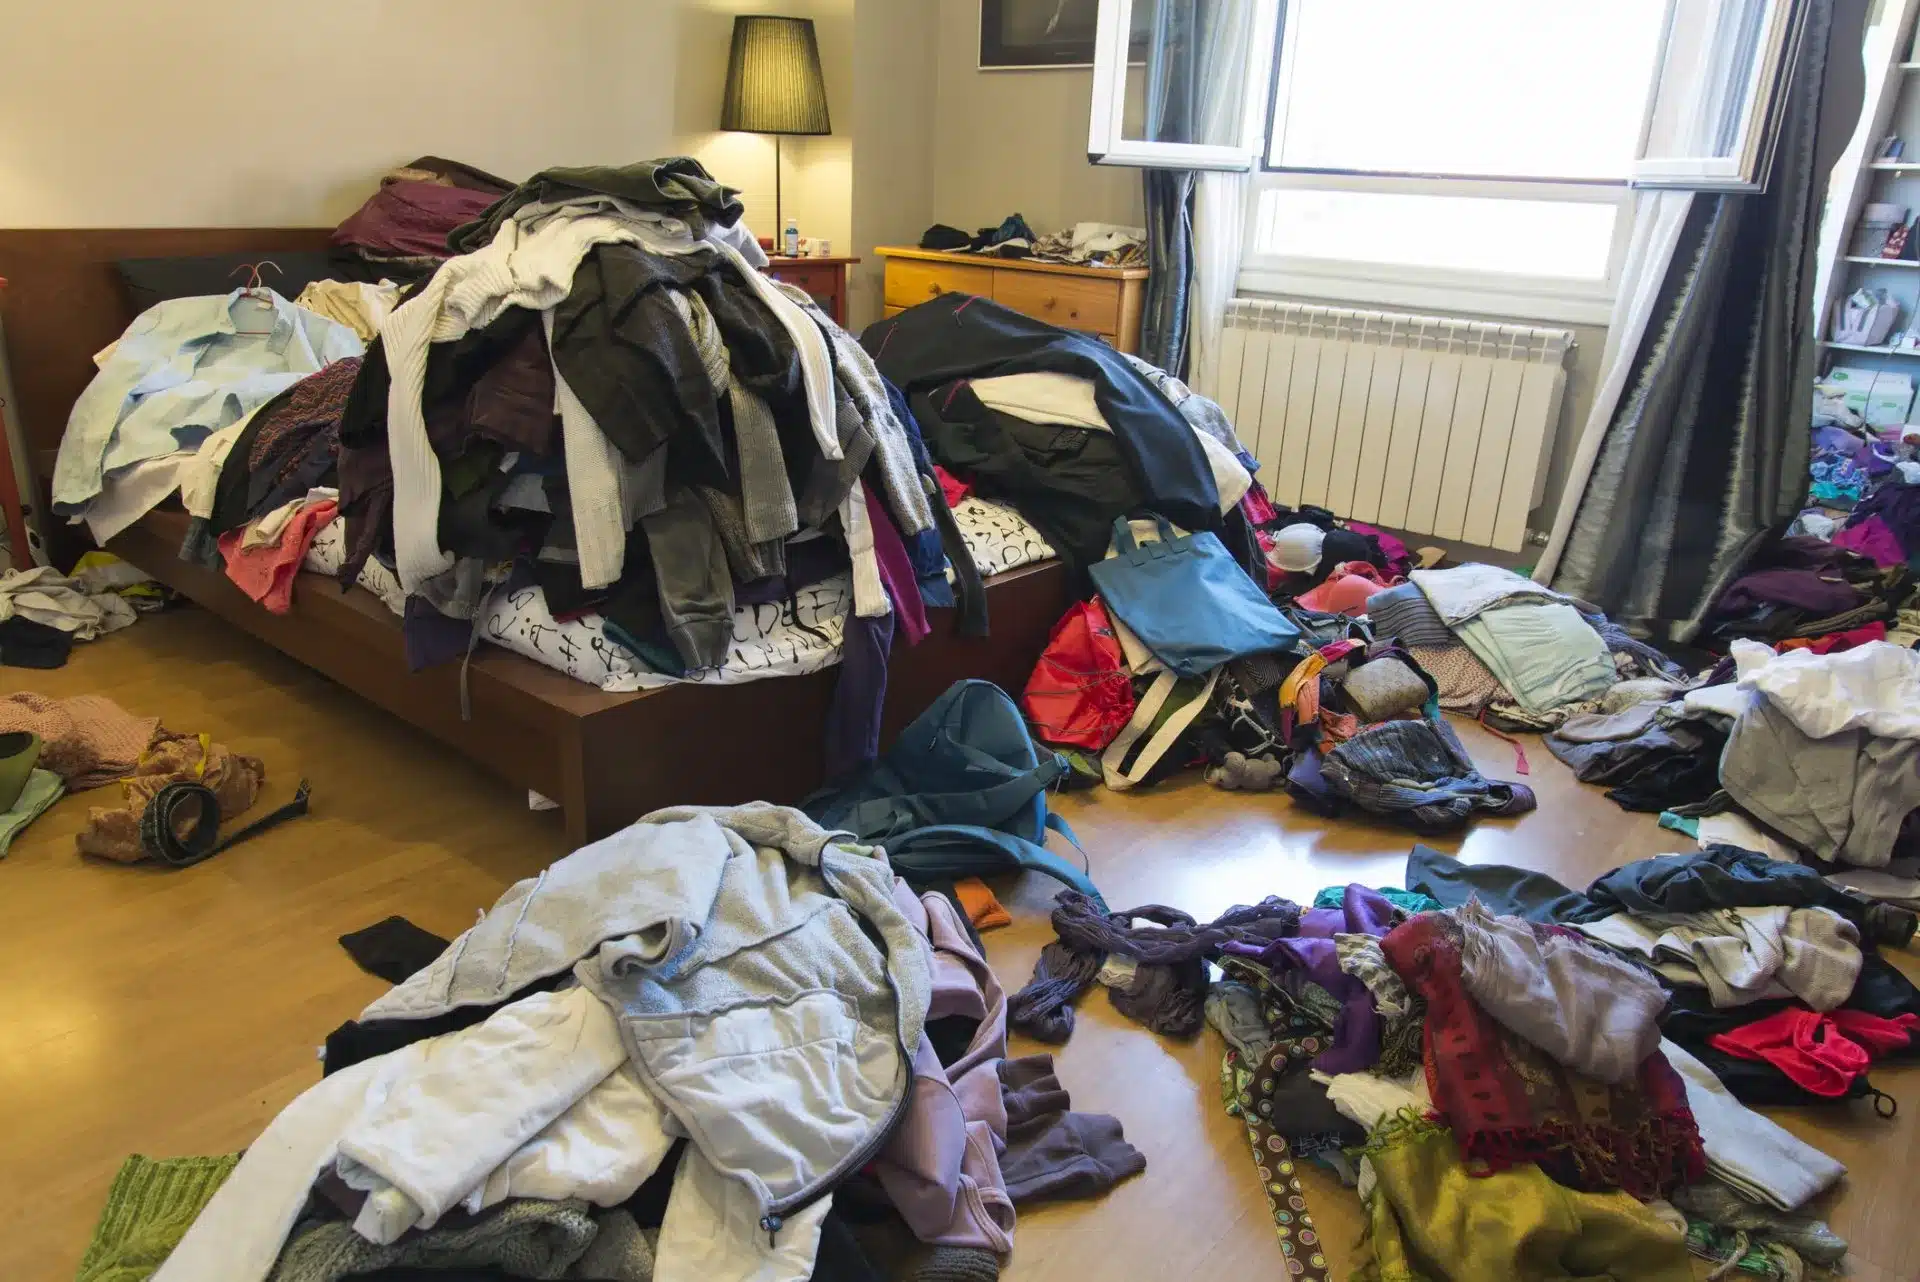 Bedroom full of clothes